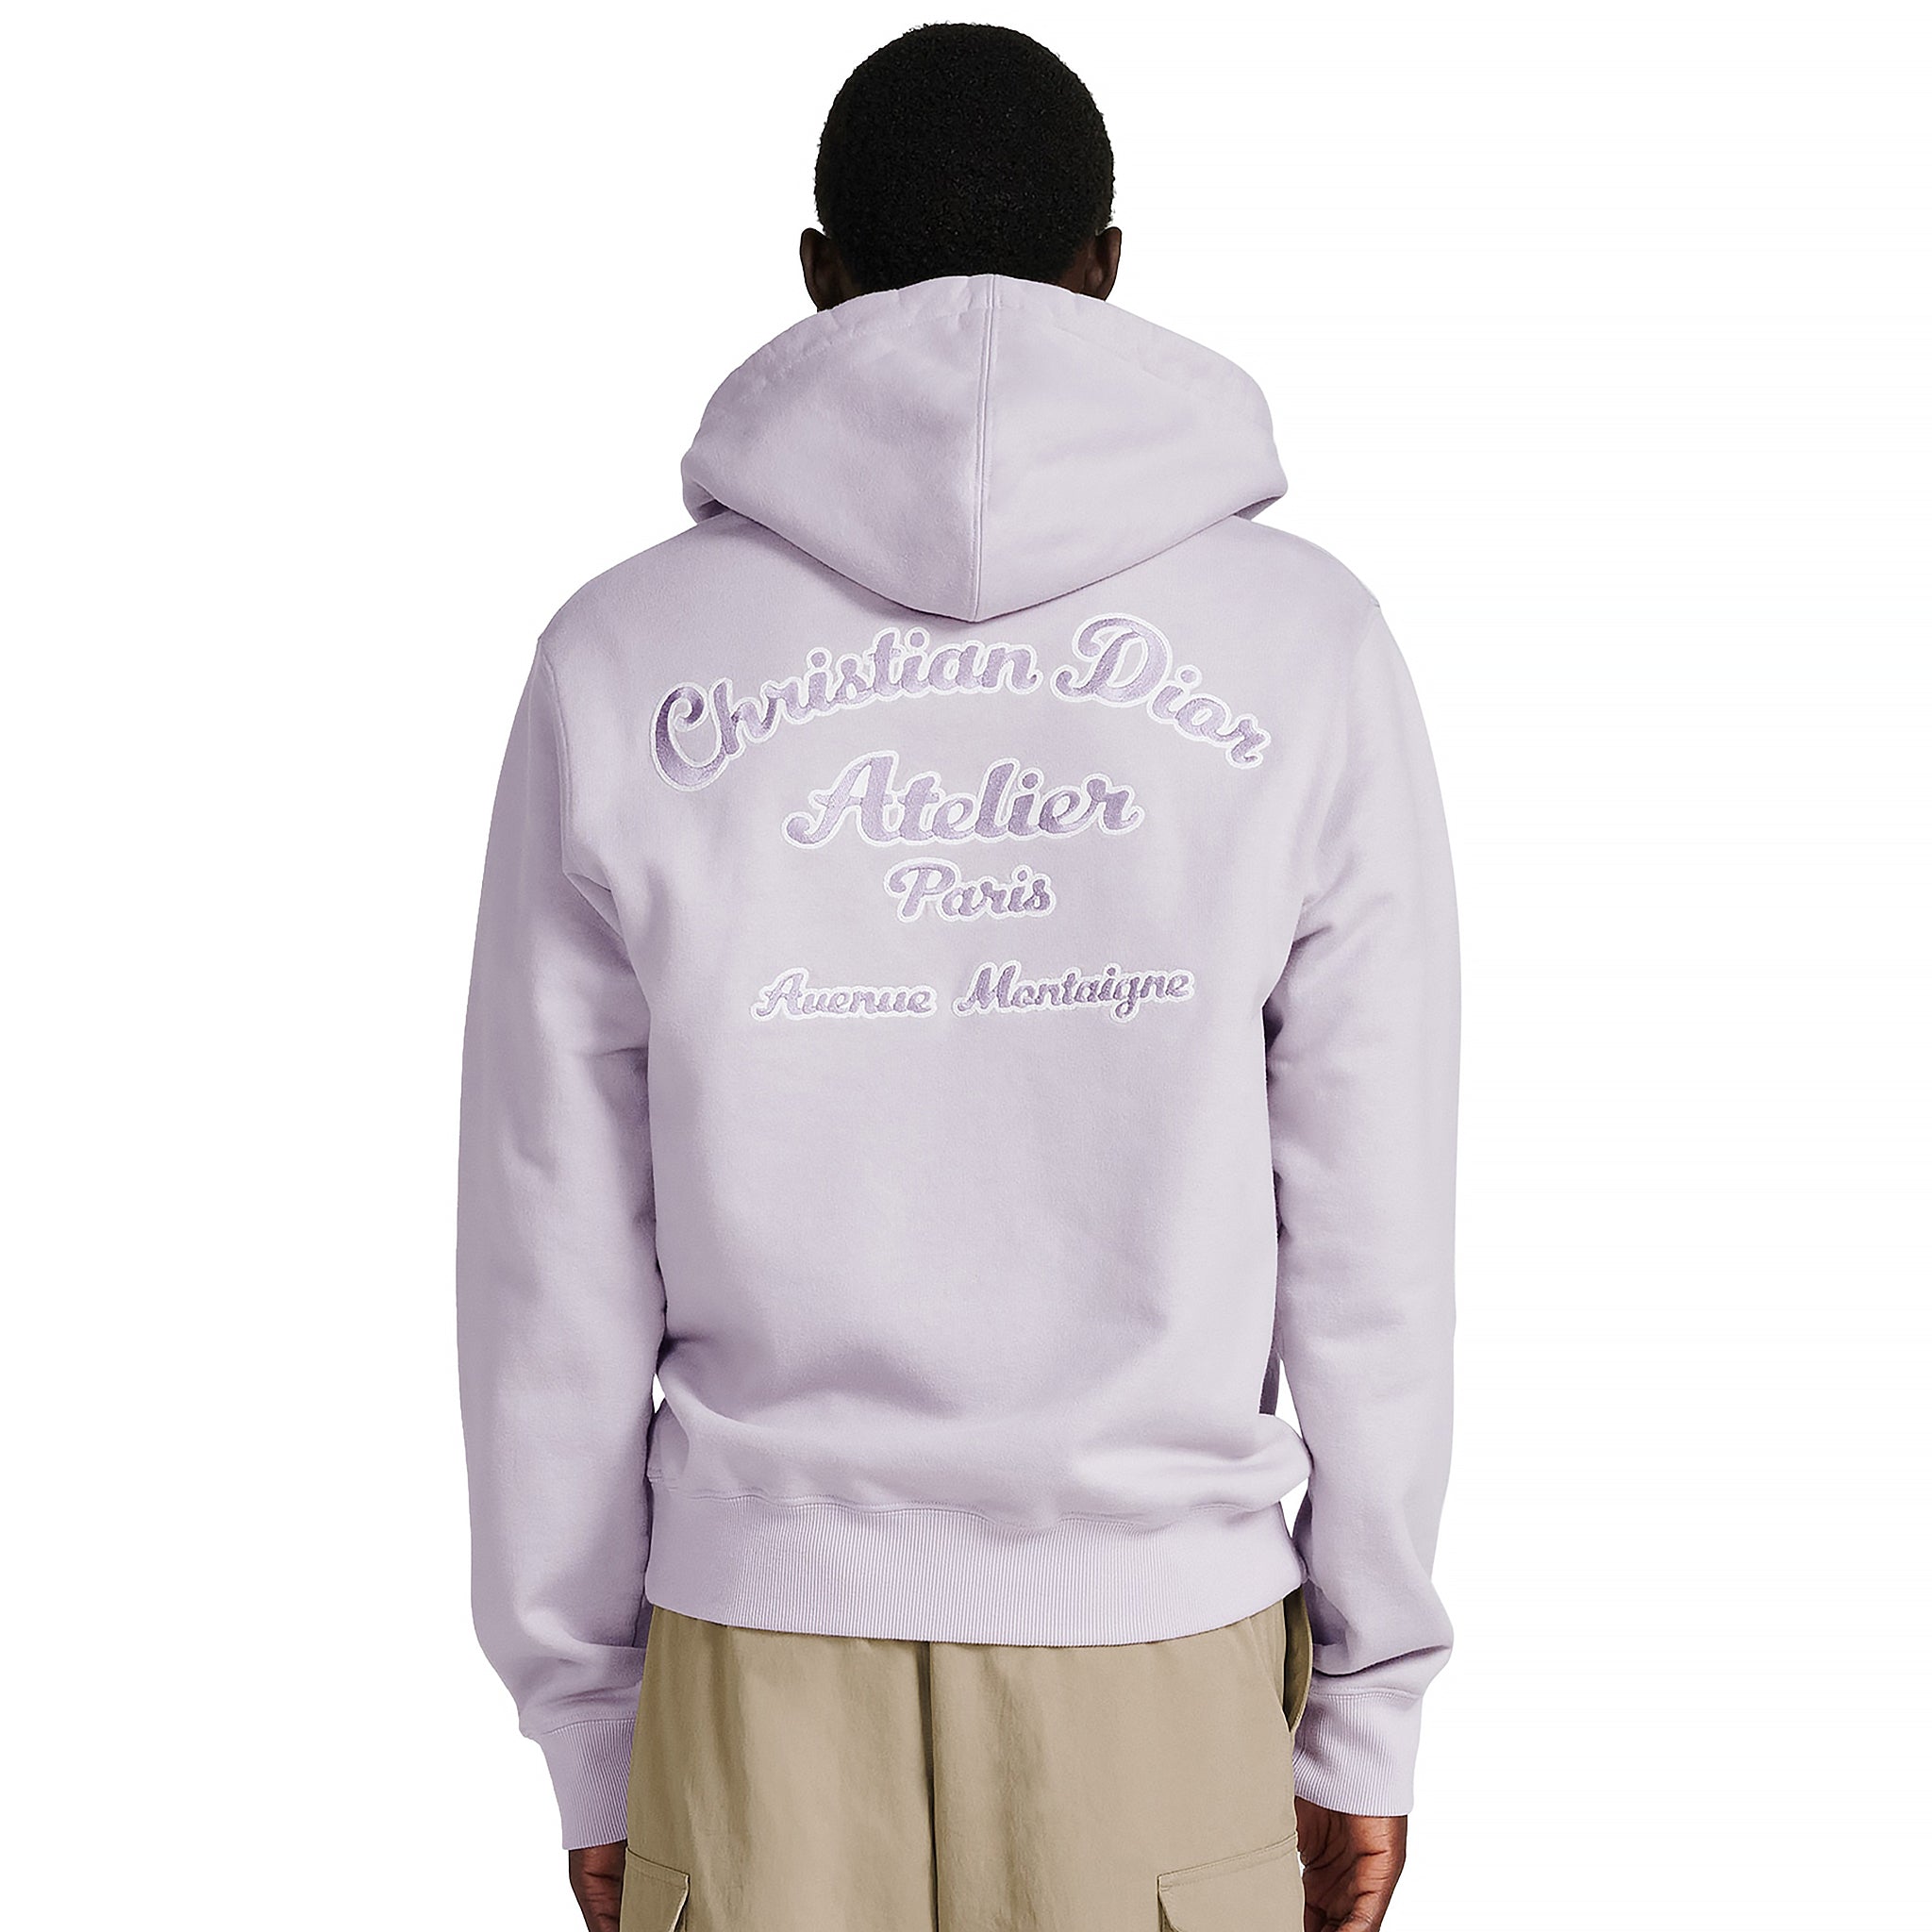 Back Model view of Dior 'Christian Dior Atelier' Mauve Hoodie front